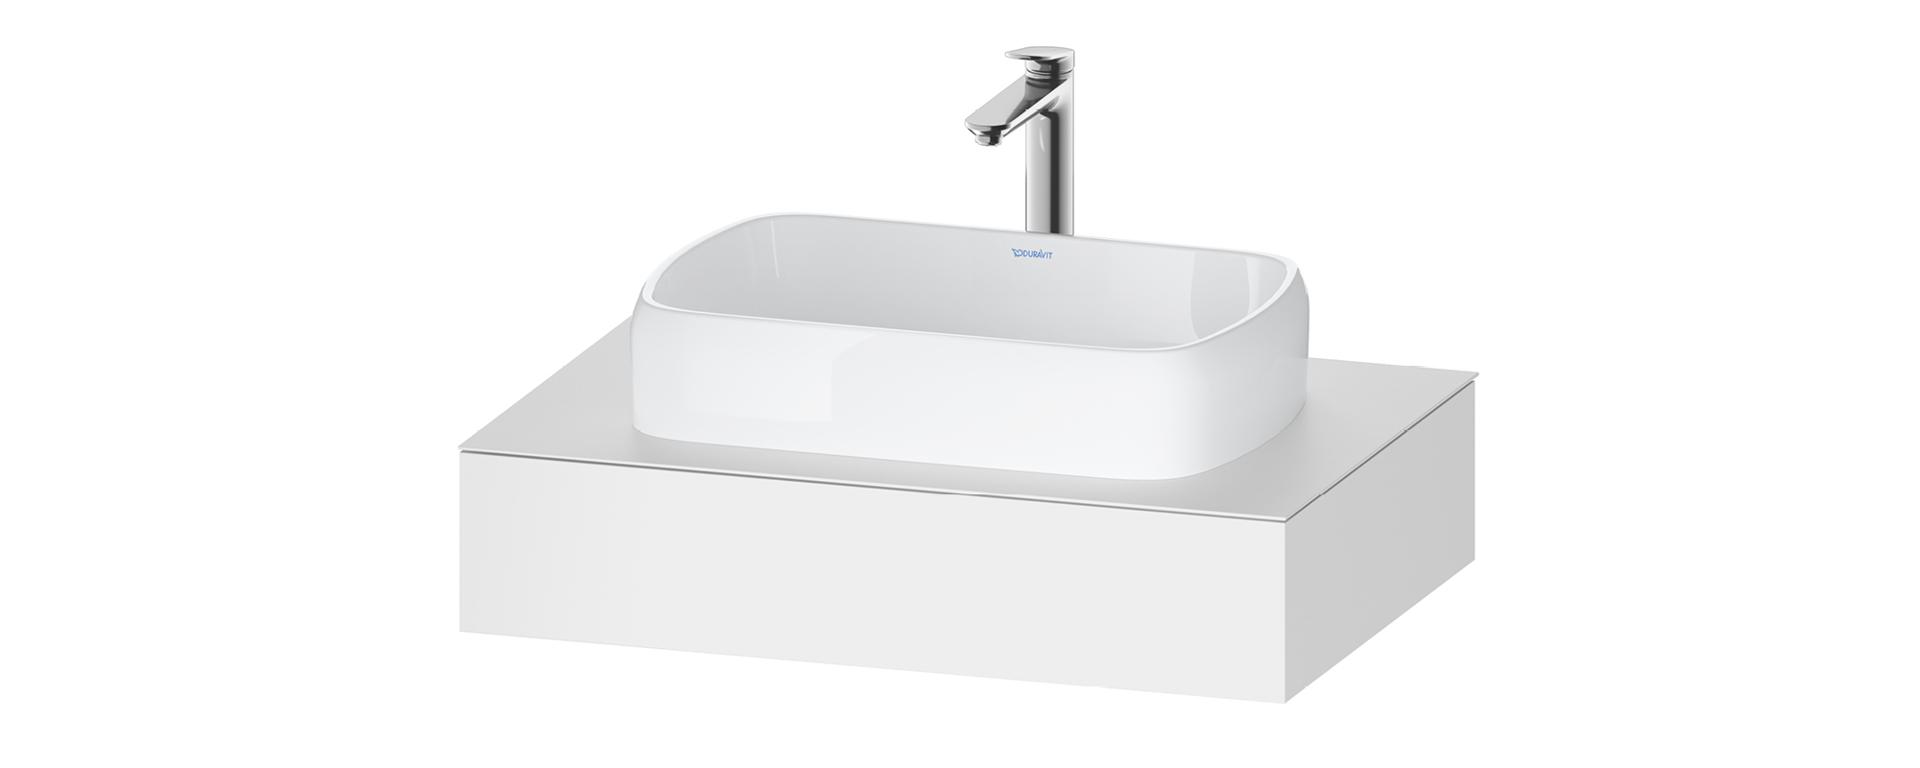 Consoles for Qatego countertop sinks
